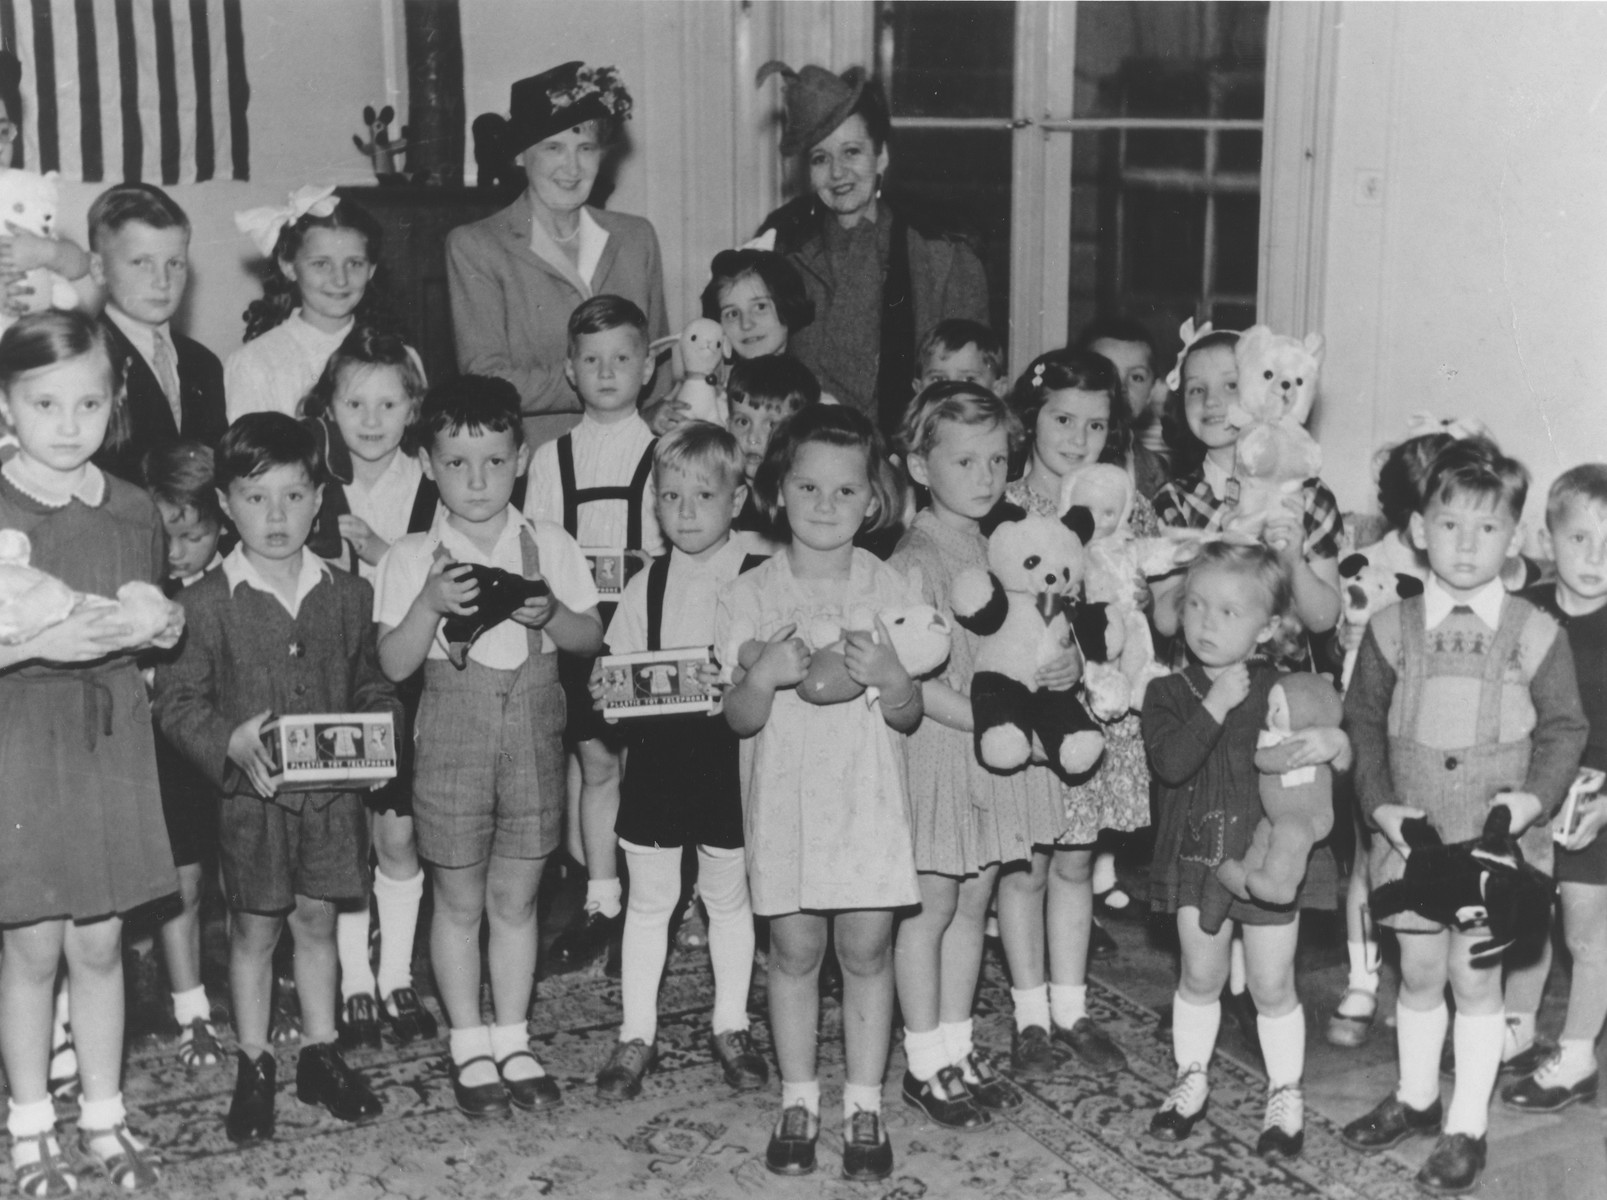 Group portrait of Jewish orphans who had survived Theresienstadt with the wife of Czech President Edvard Benes and the wife of the American Ambassador Laurence Steinhart.  Each child holds a newly received toy.

Among those pictured is Judis Baehr.